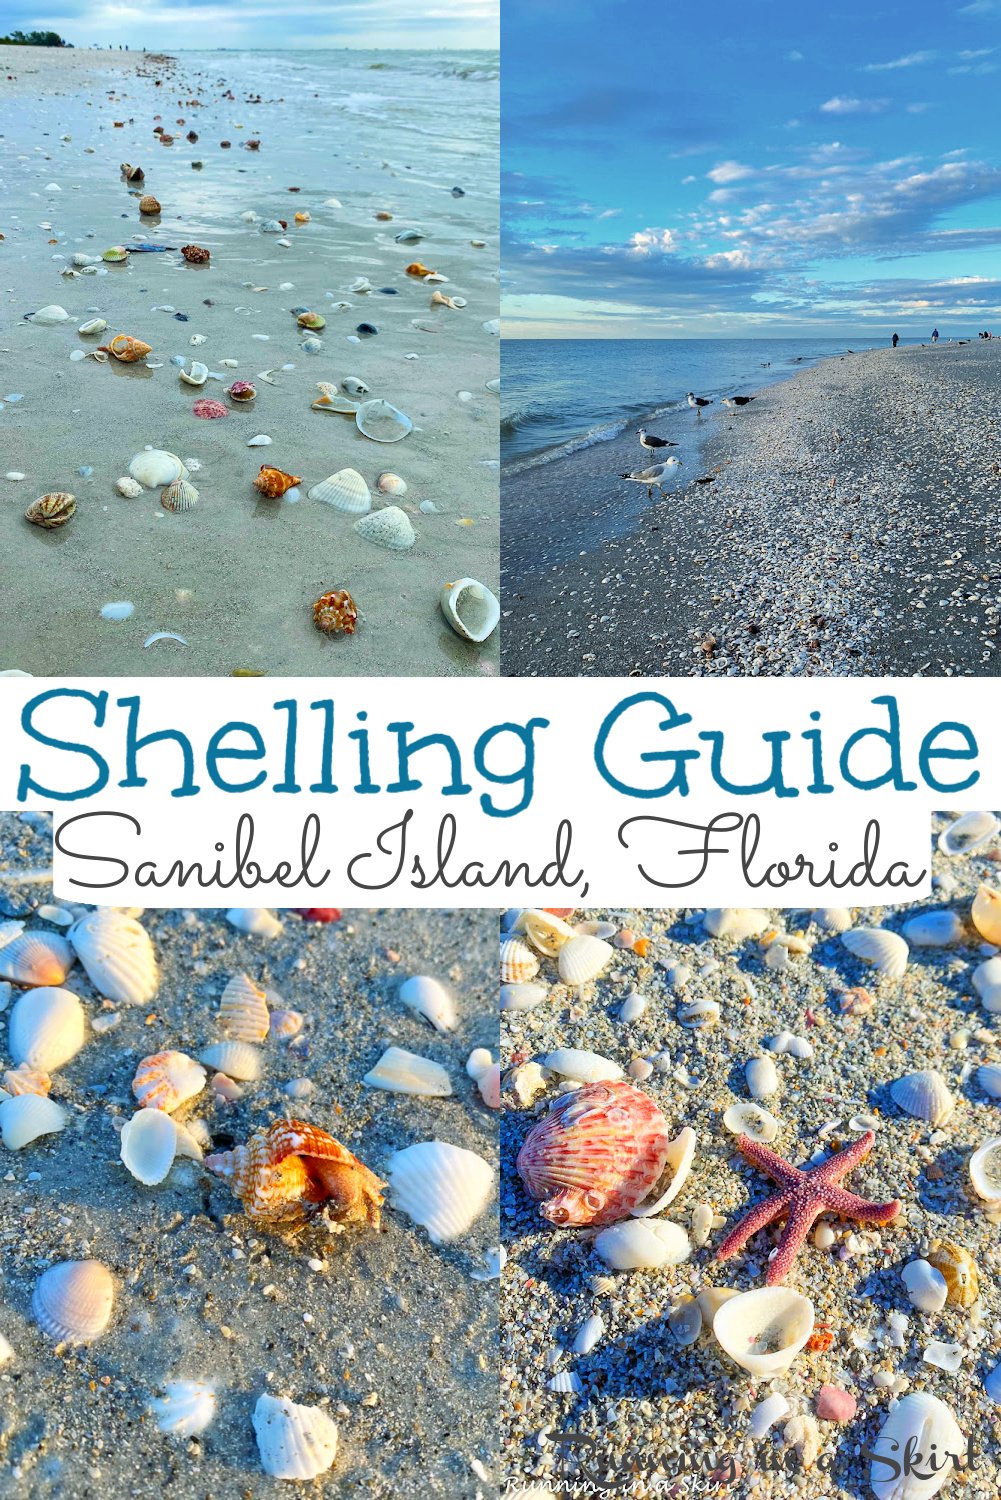 Sanibel Shelling Guide - Where & How to Find the Best Shells. Looking for the best shelling in Sanibel, Florida? This guide has specific tips on the best places to look, best shelling beaches in Sanibel FL, times to look, and which shells are the best. Sanibel Island shelling lives up to the hype! / Running in a Skirt #sanibel #floridatravel #sanibelflorida #sanibelandcaptiva via @juliewunder